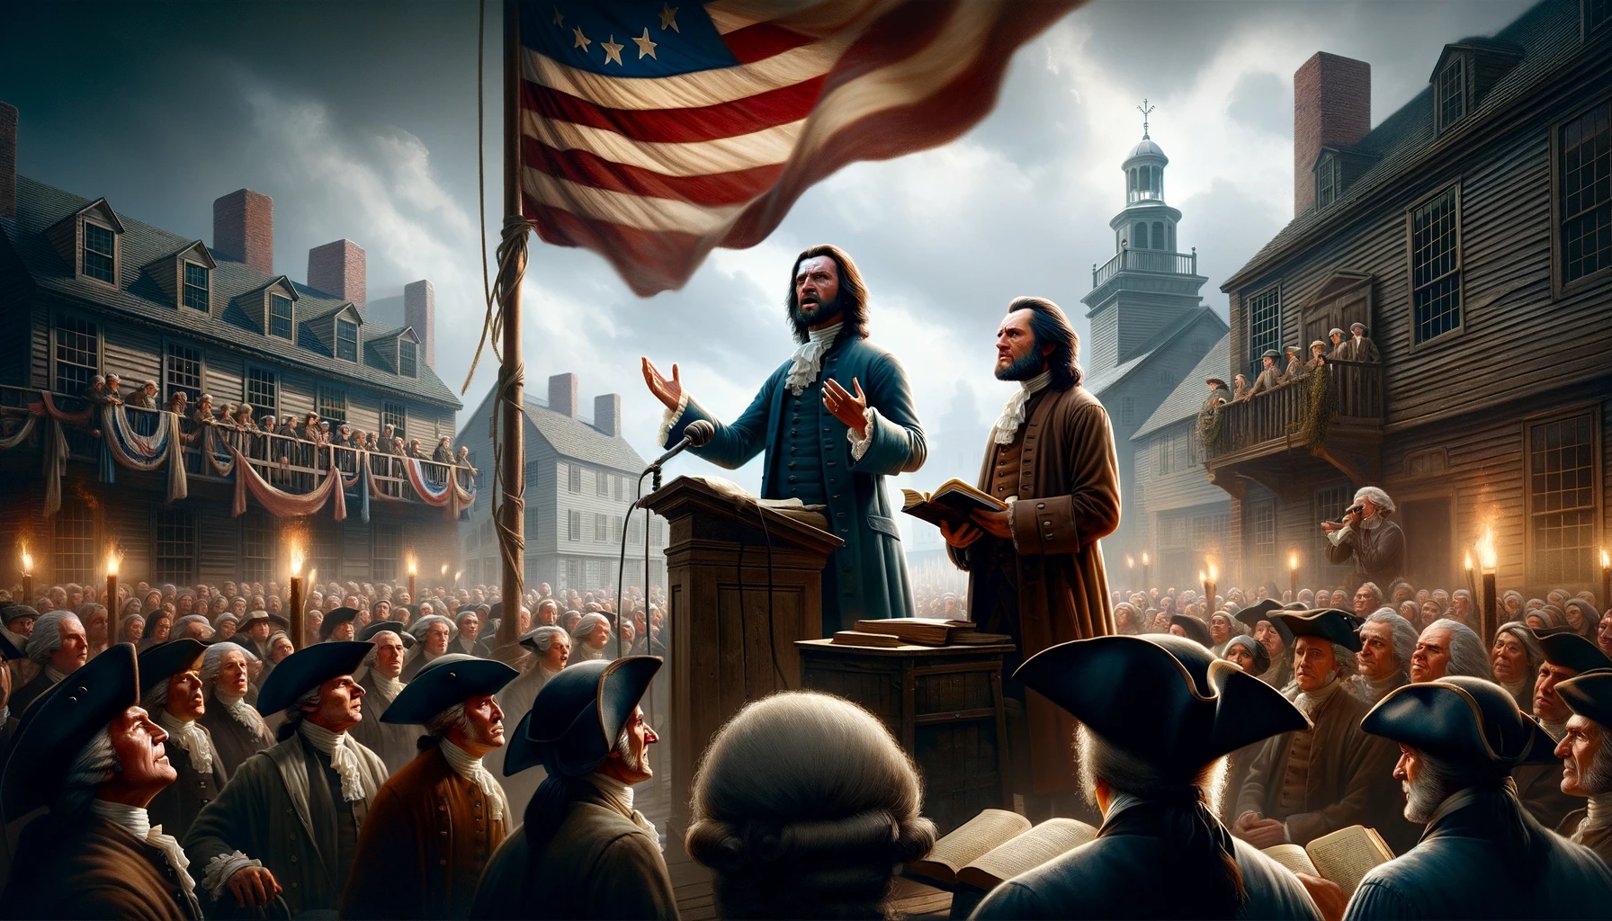 How Did Separation Of Church And State Affect The American Revolution